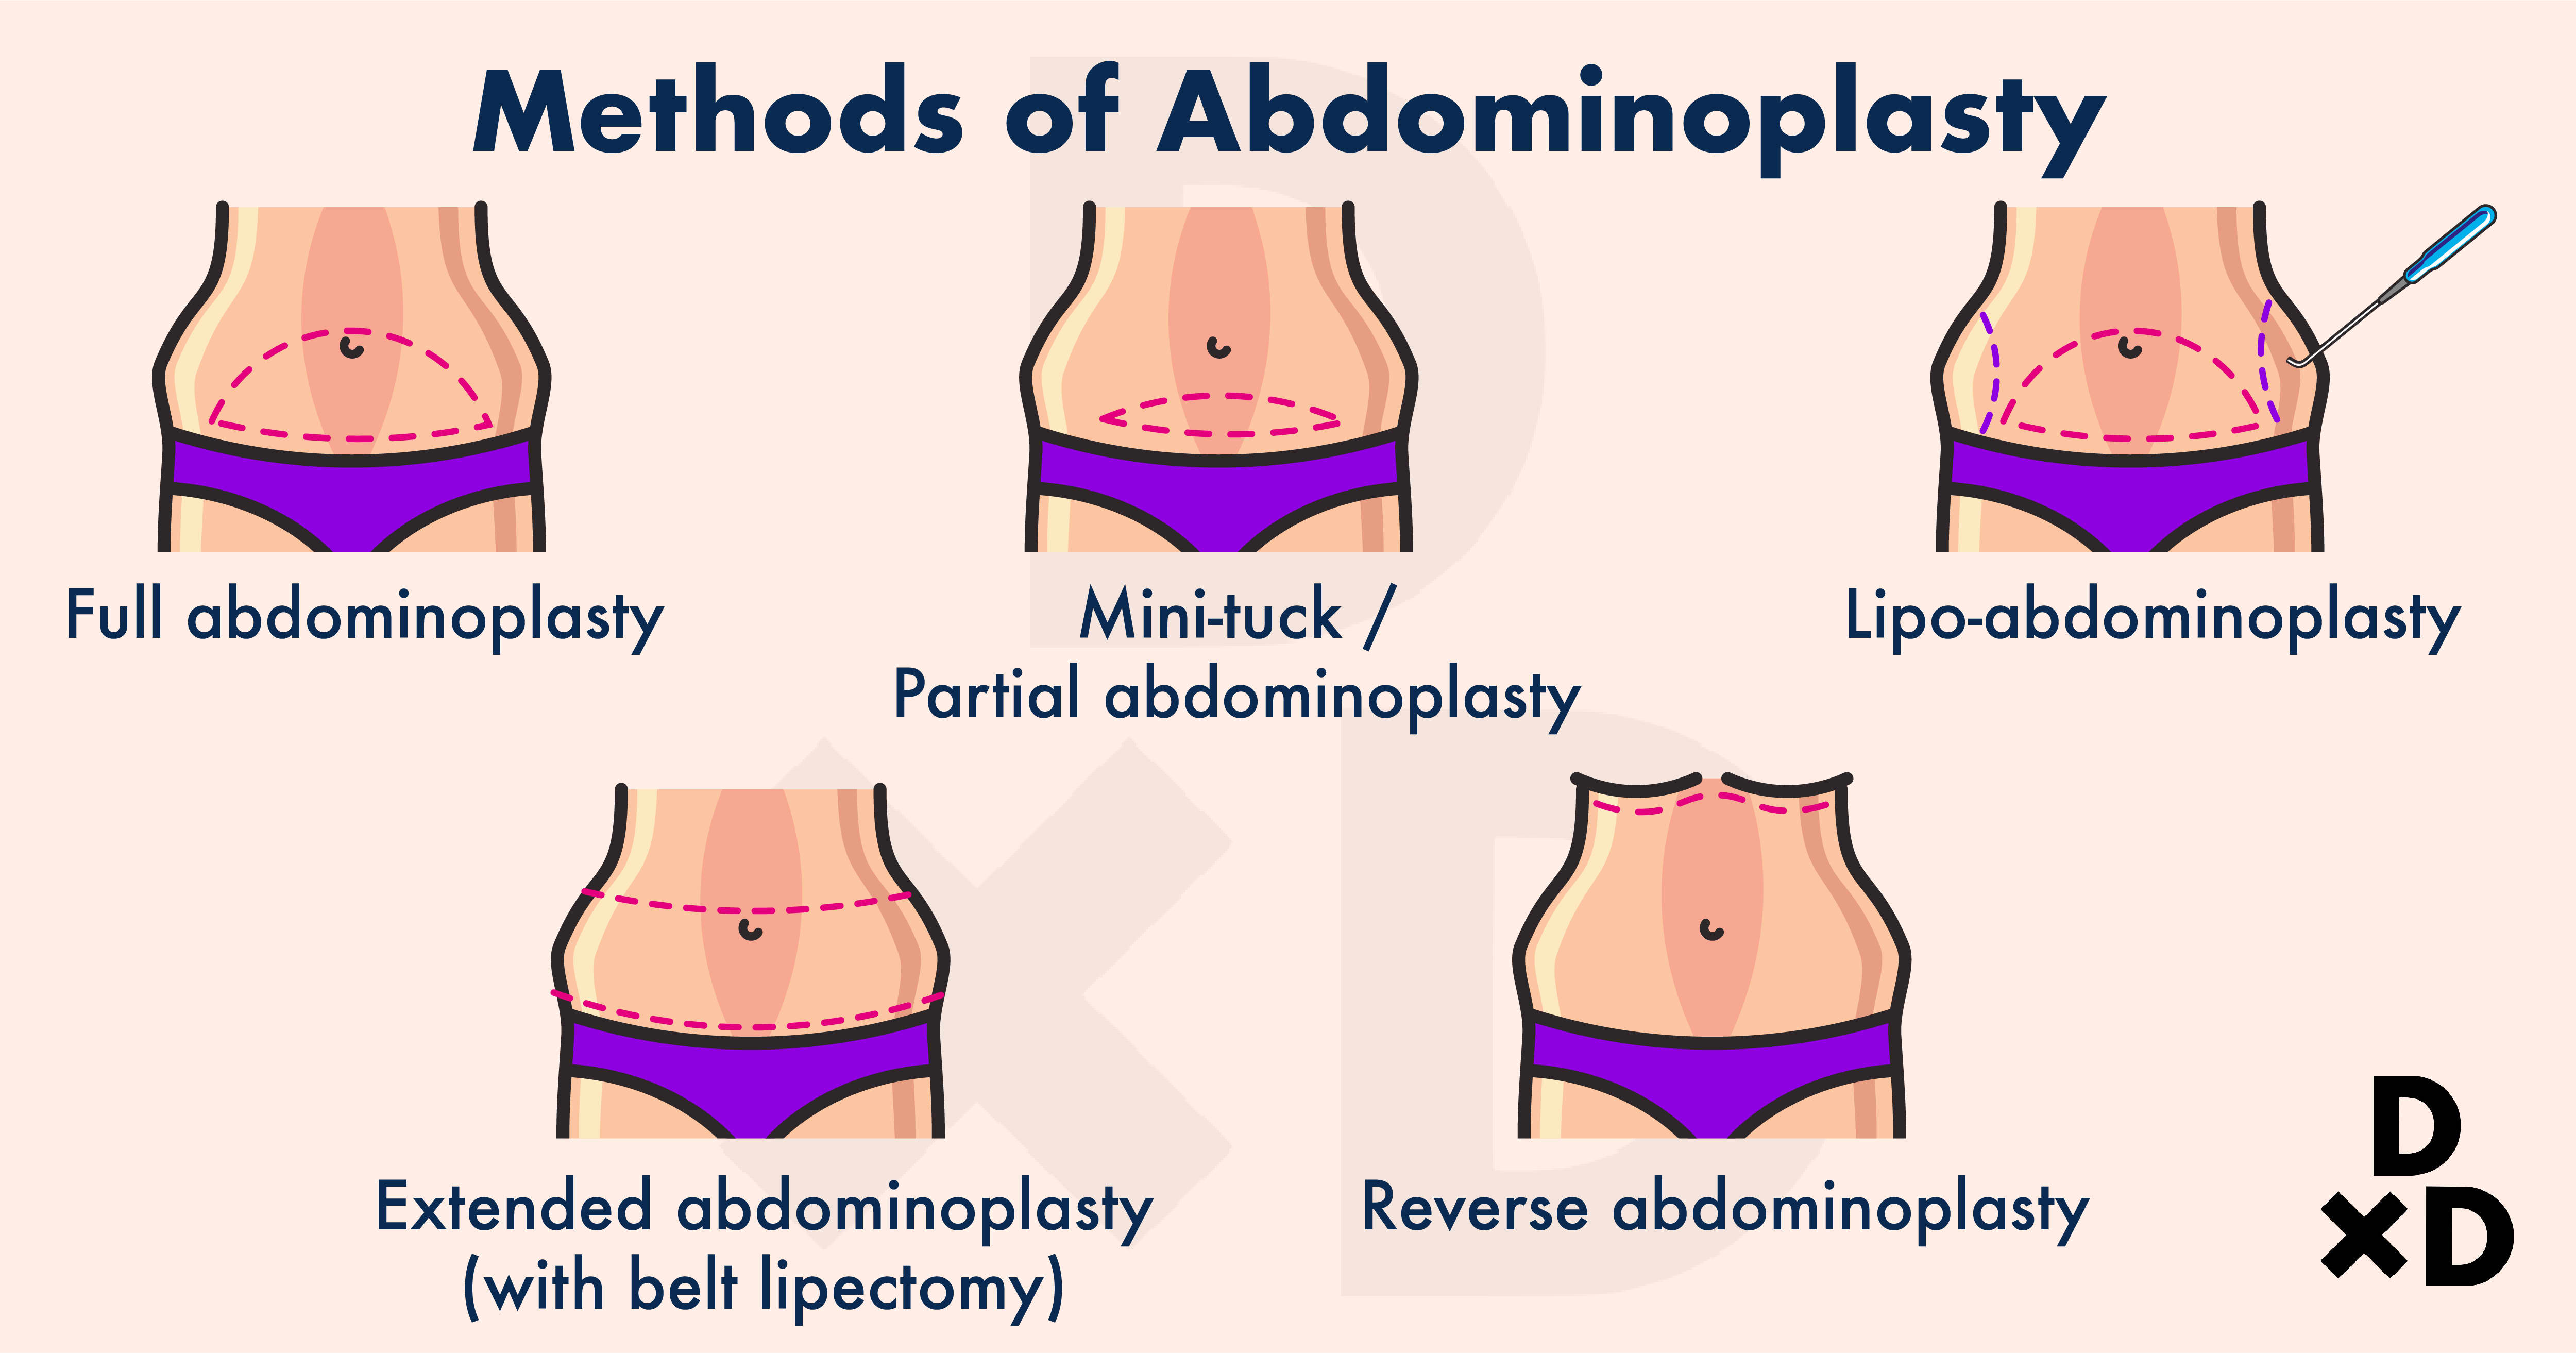 Tummy Tuck Your Guide To Getting An Abdominoplasty In Singapore Human